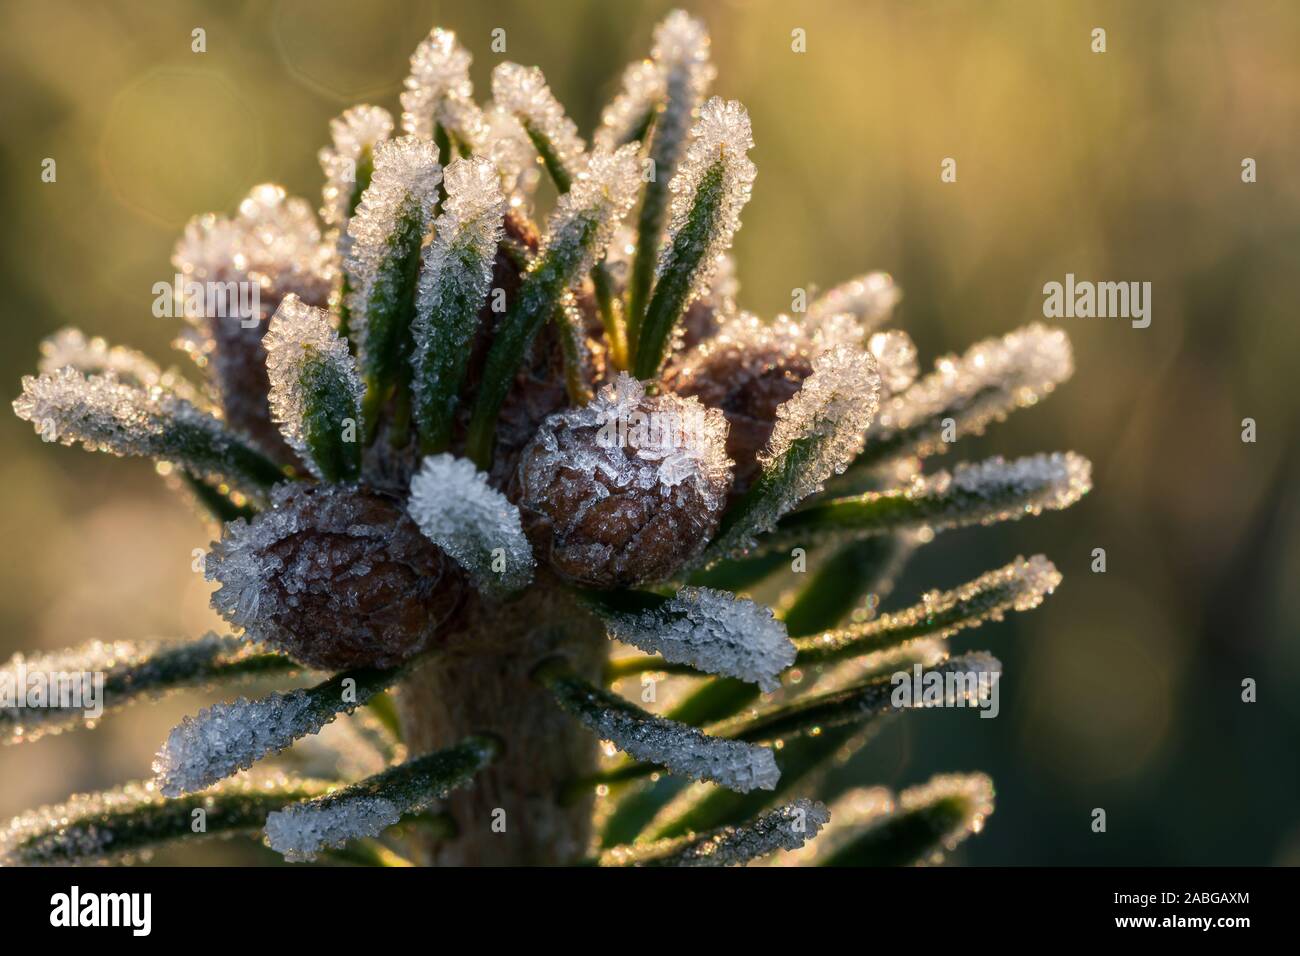 Tip of Caucasian fir branch (Nordmann fir) with small young fir cones, covered with ice crystals, back lit by yellow sunlight of golden hour Stock Photo